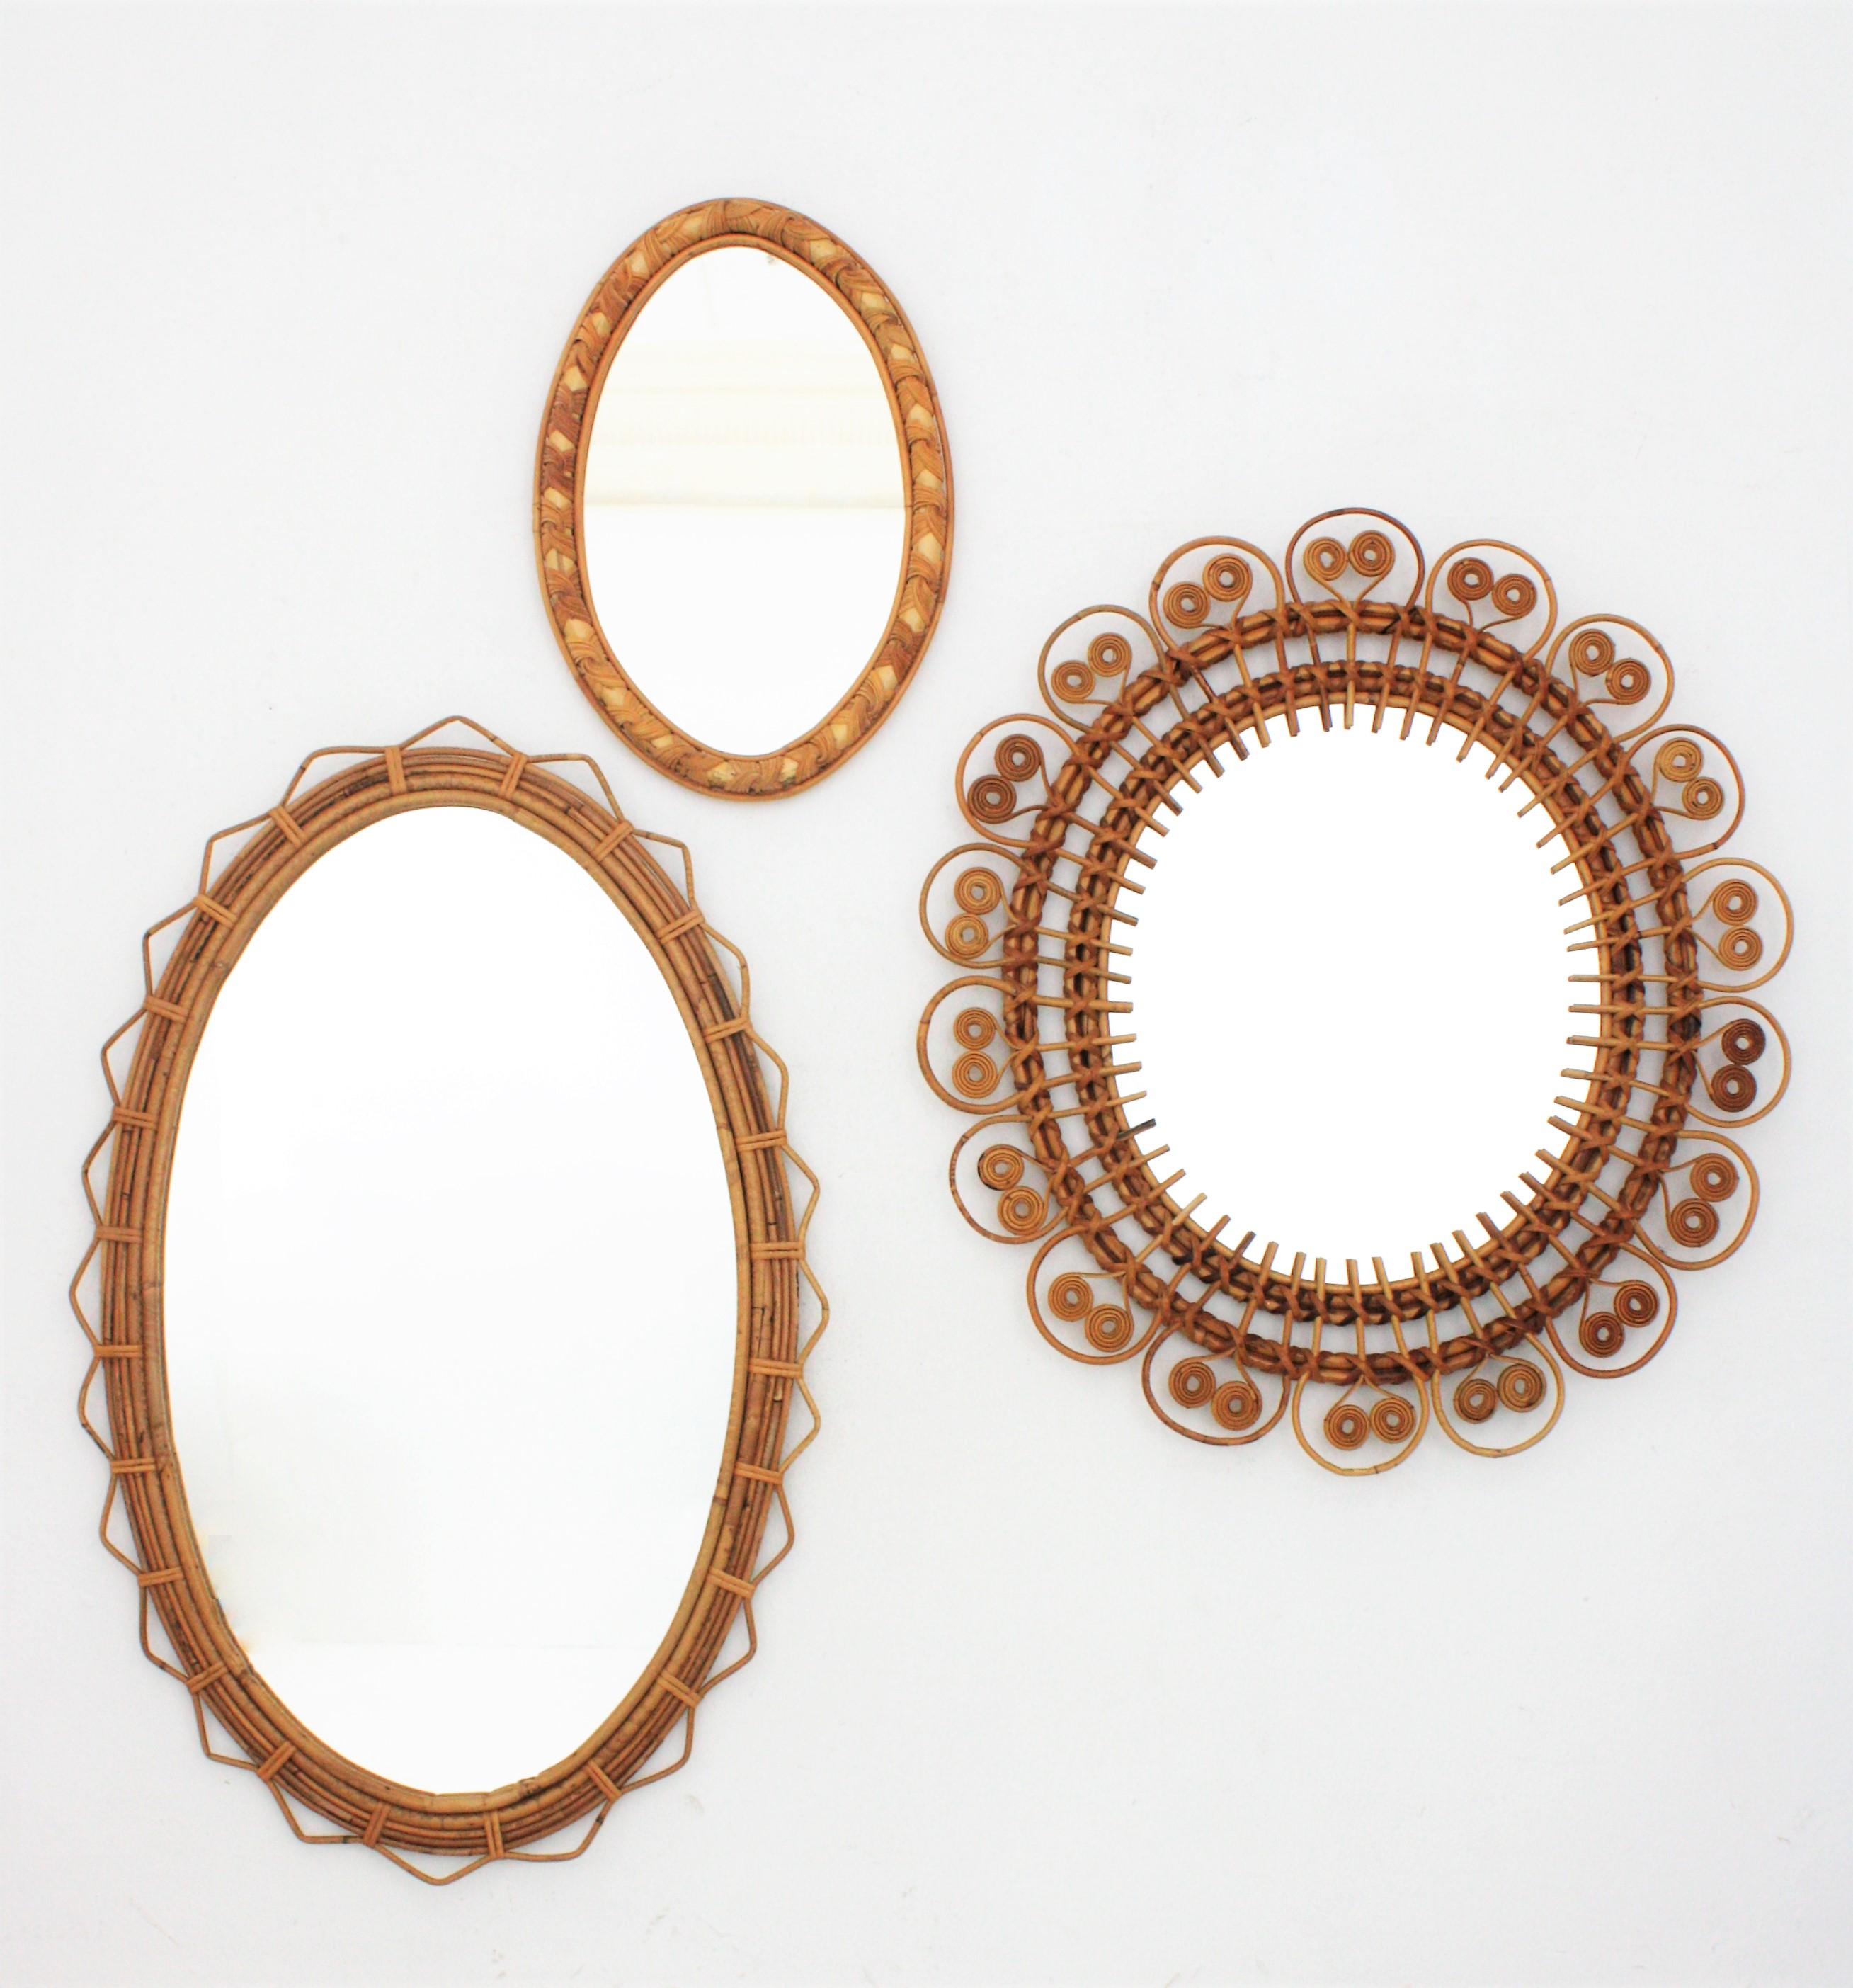 An spectacular handcrafted bamboo and rattan mirror with a beautiful jagged geometric design frame. France, 1950s.
This piece has all the taste of the Mediterranean French Riviera style and it is the perfect choice in a Mid-Century Modern or